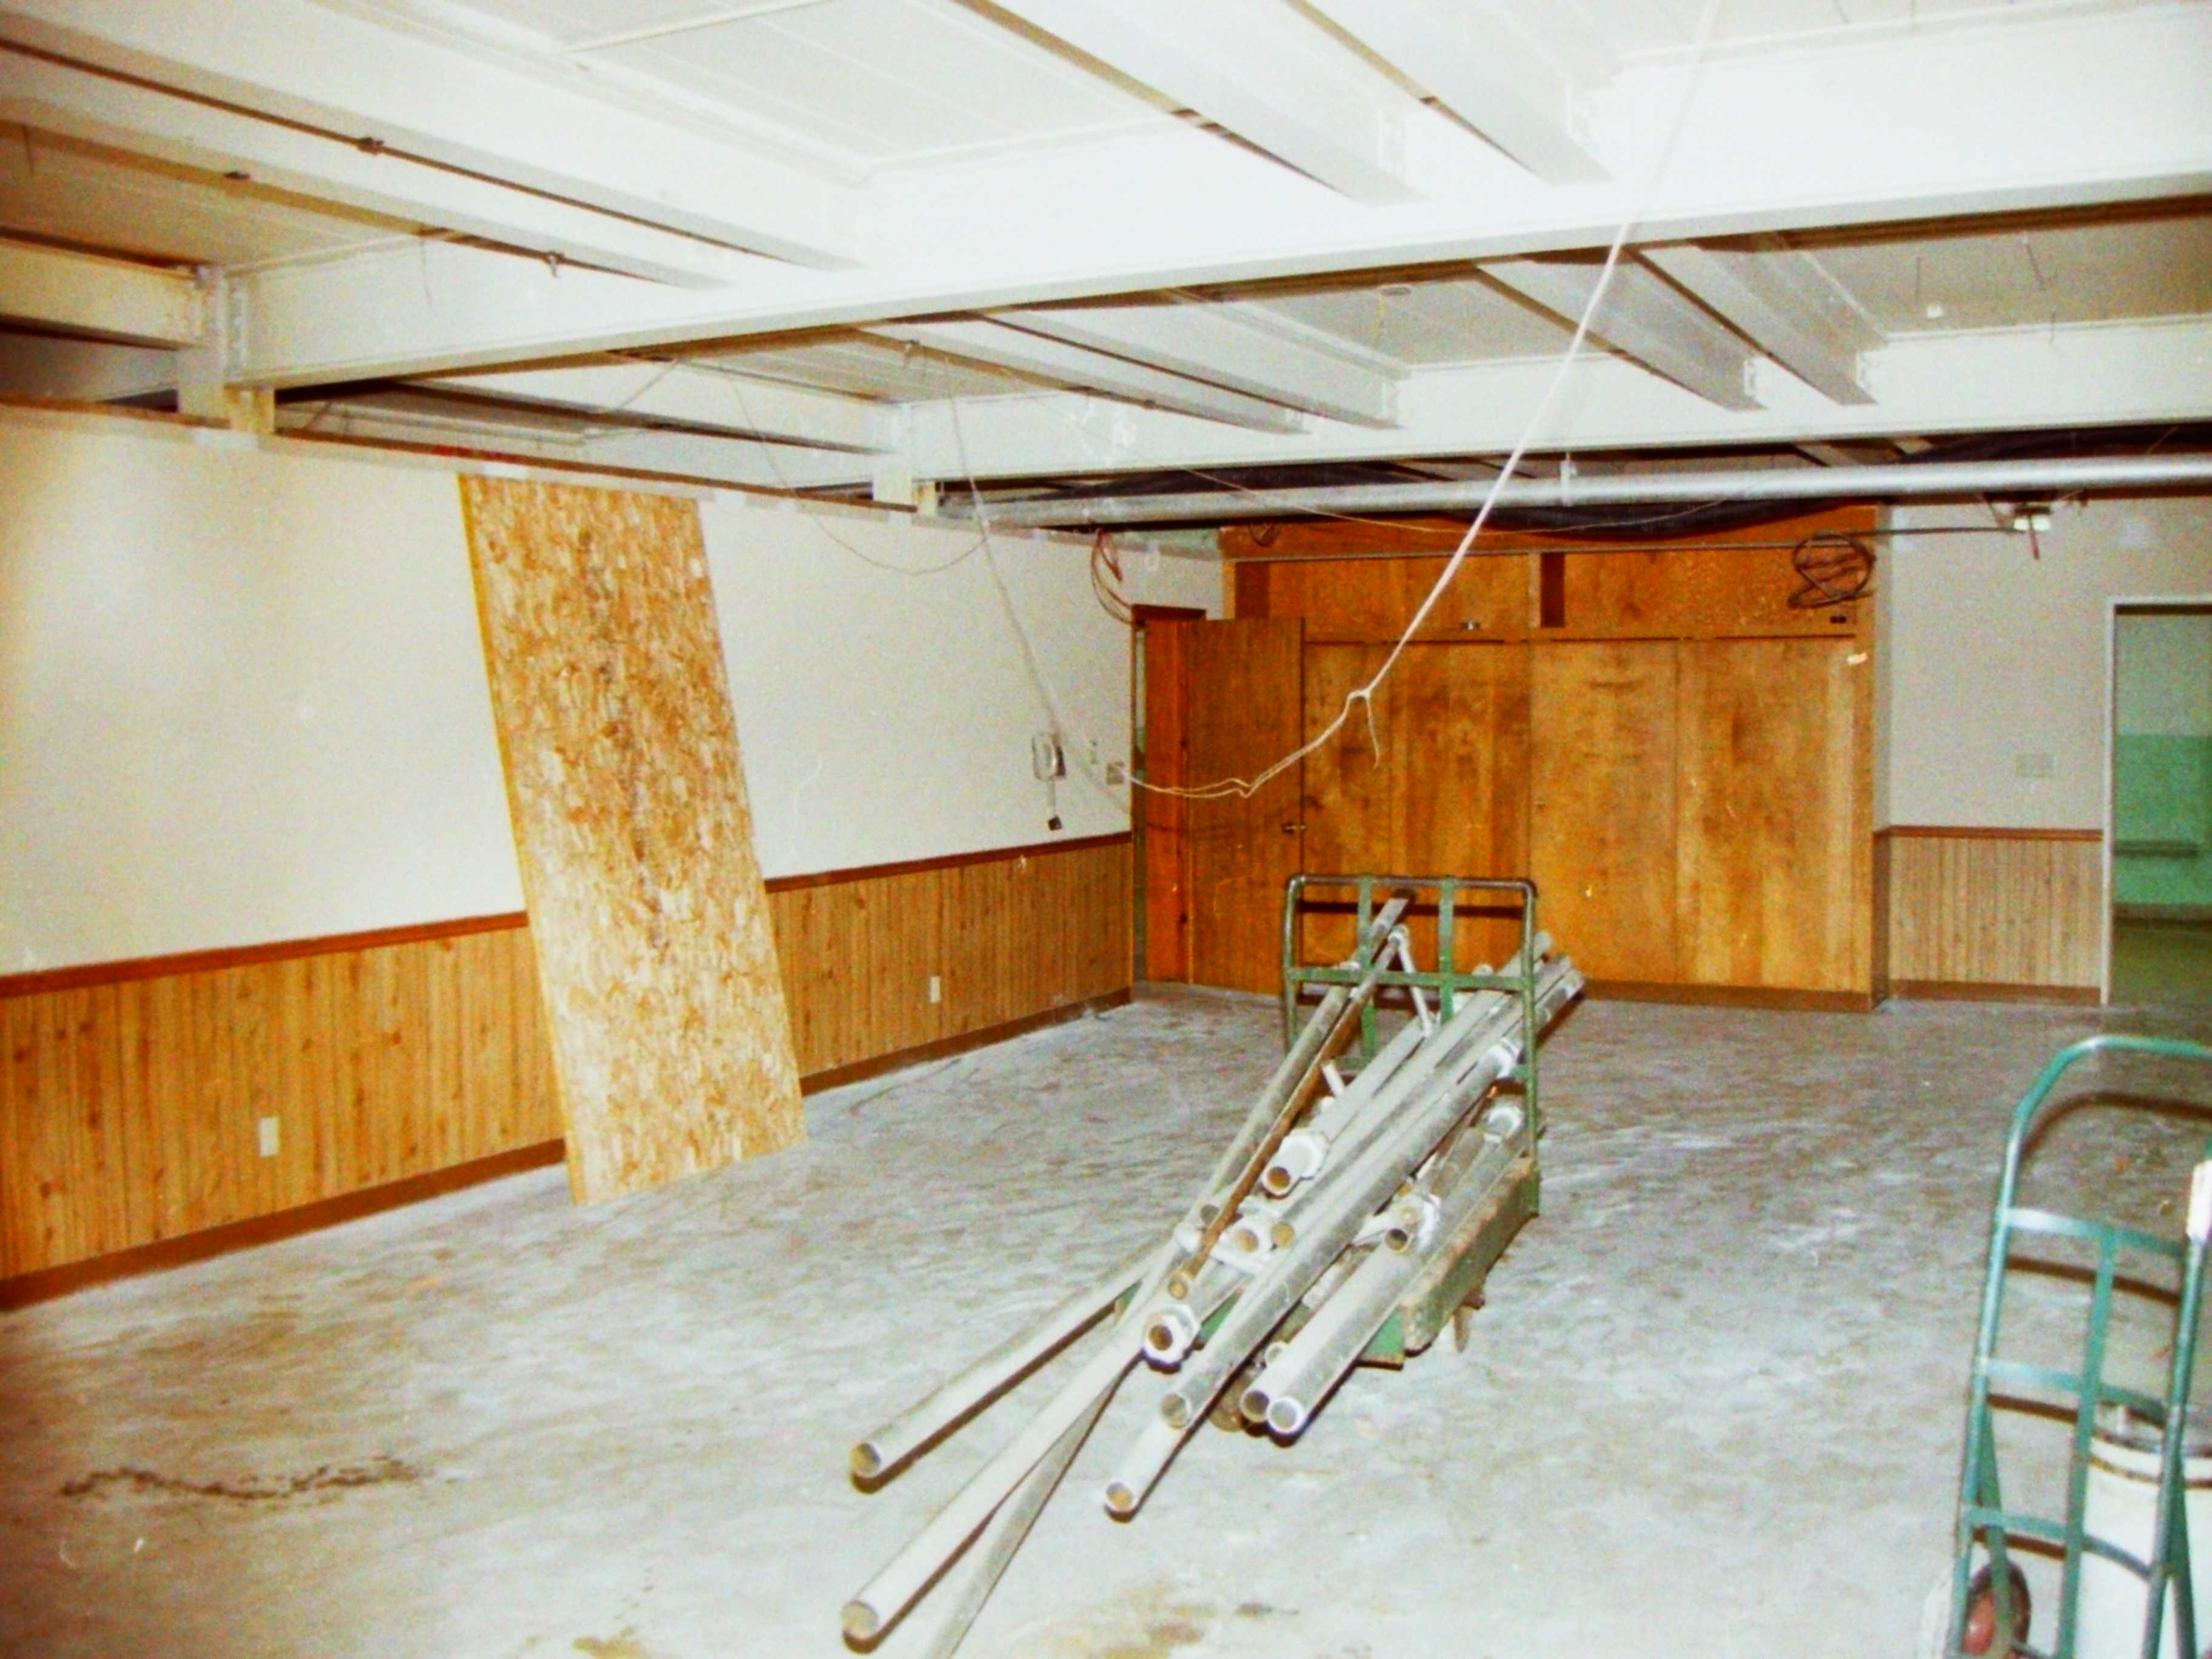 08-21-91  Other - Renovations 2